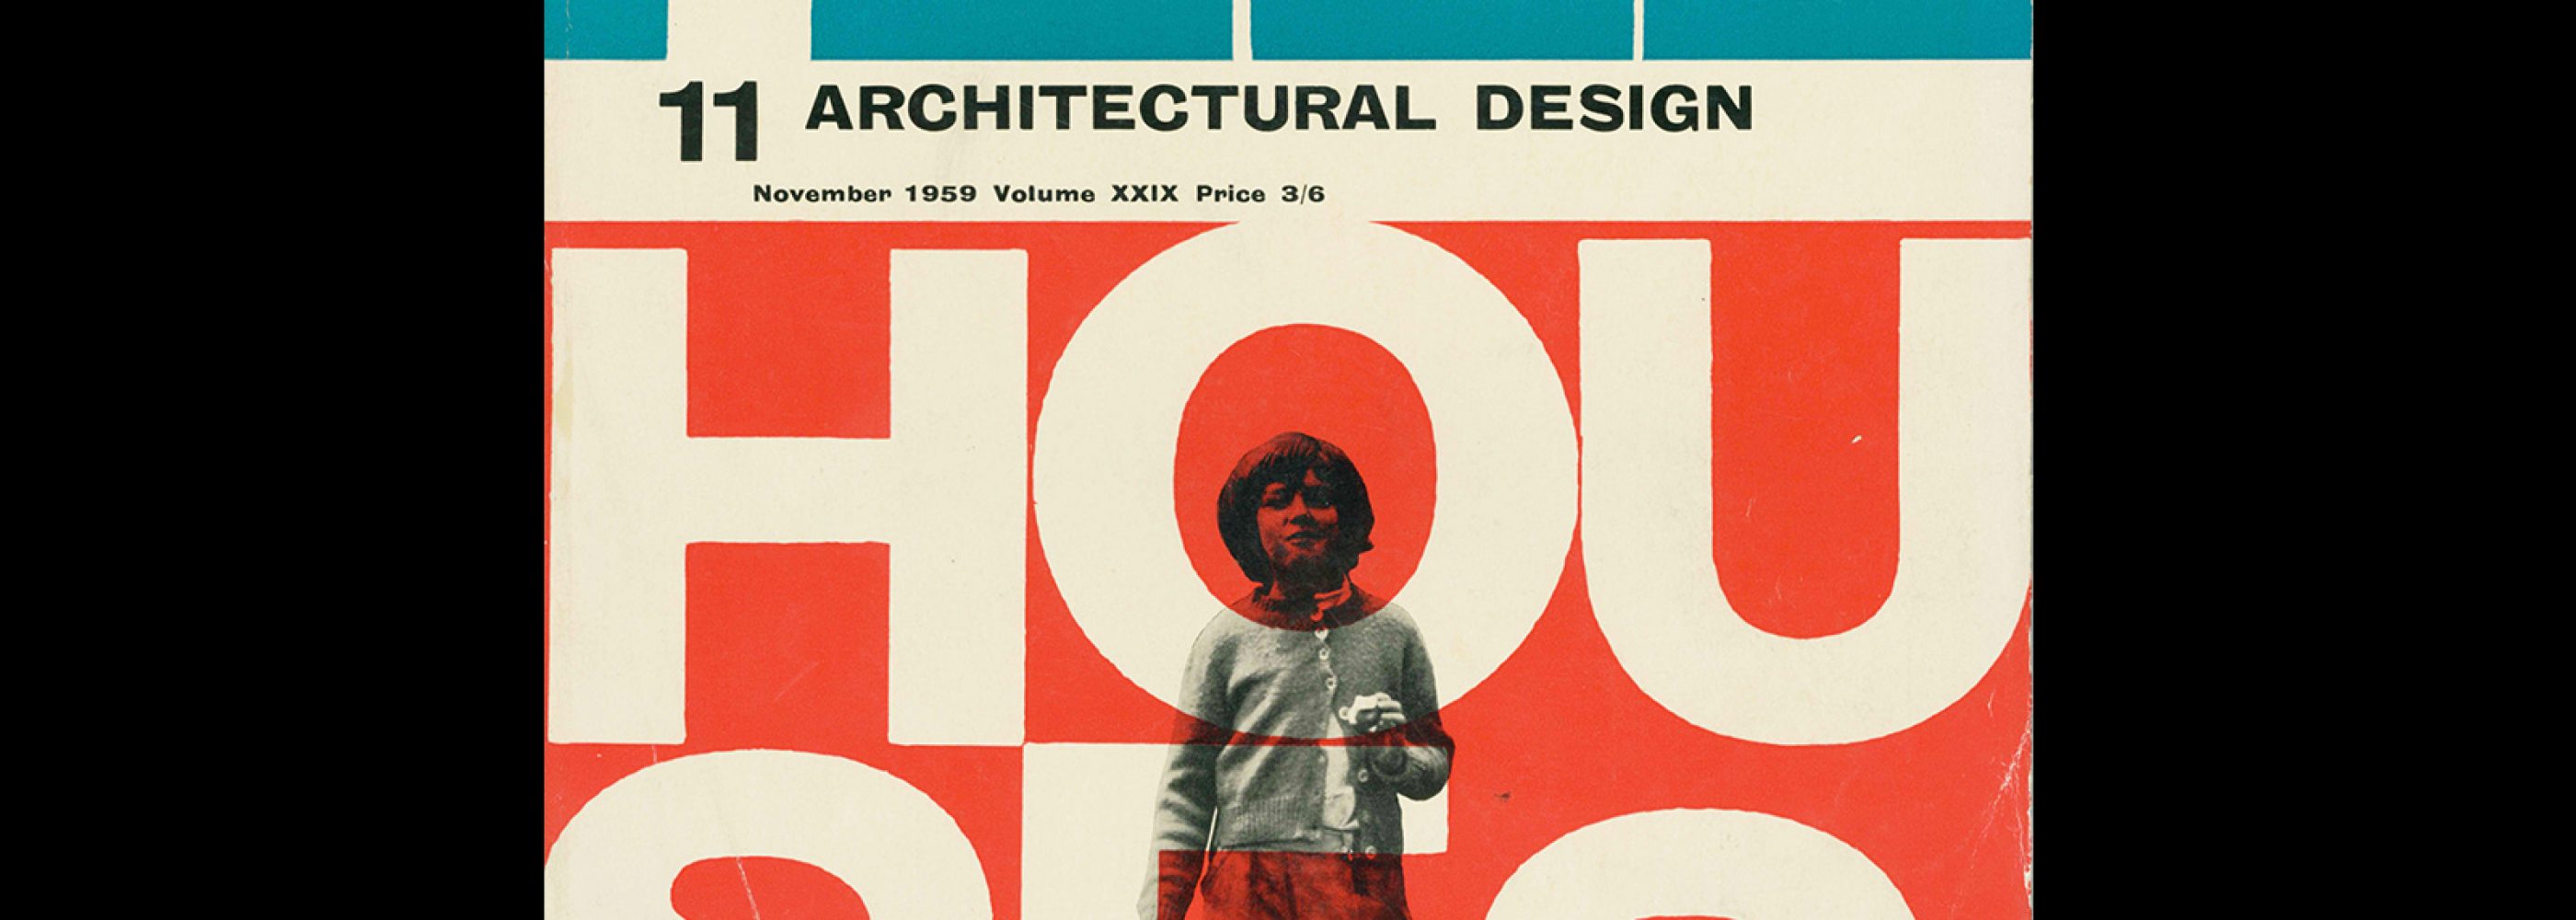 Architectural Design, November 1959. Cover design by Theo Crosby